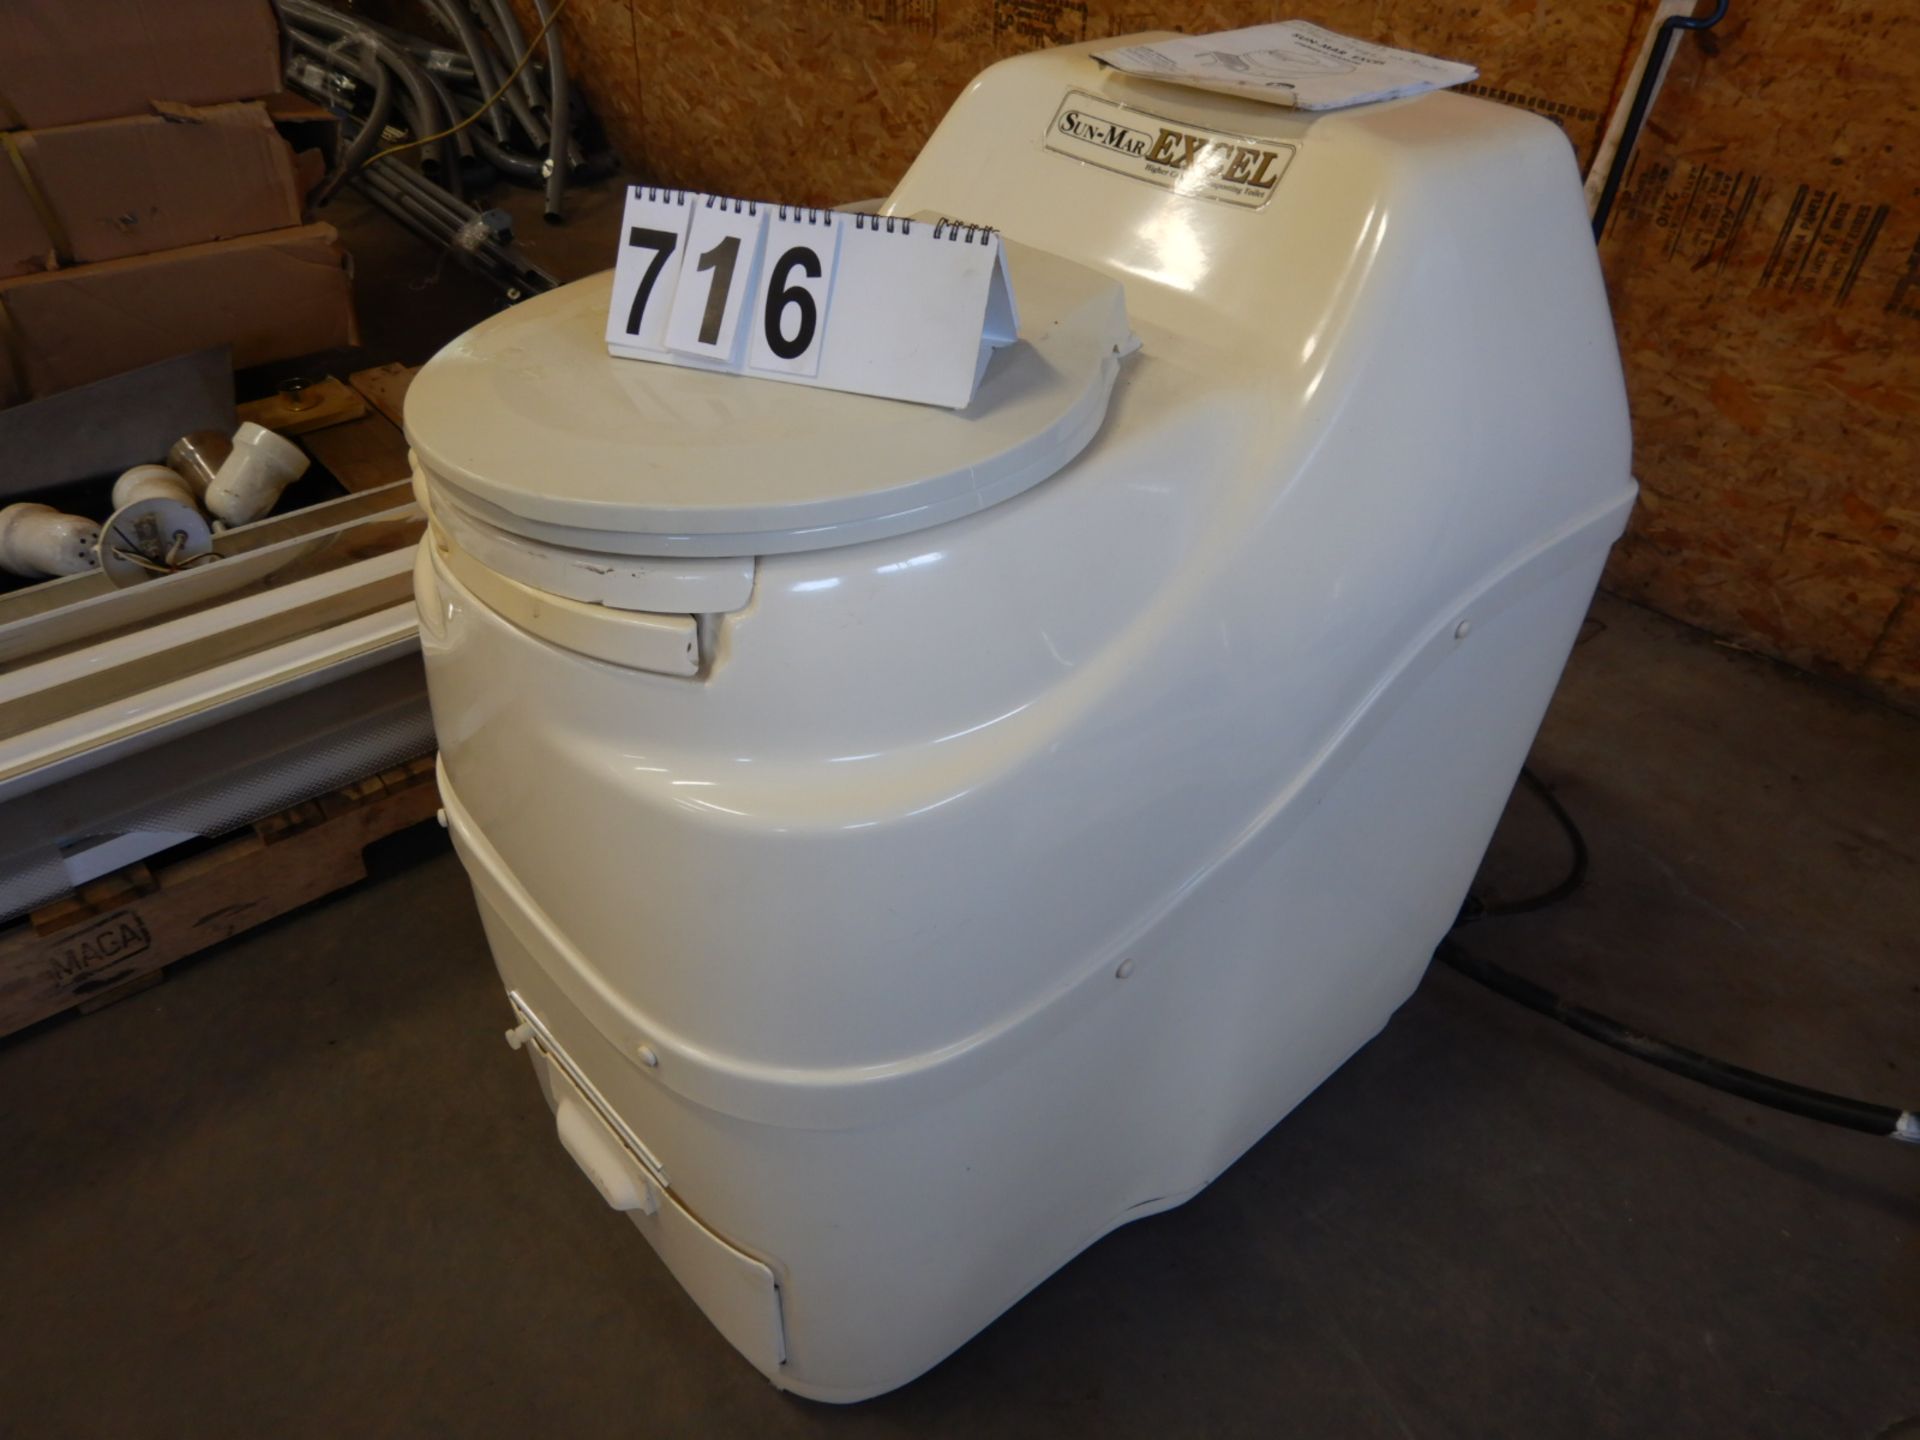 SUN-MAR EXCEL COMPOSTING TOILET W/4 BAGS COMPOST SURE BULKING MATERIAL